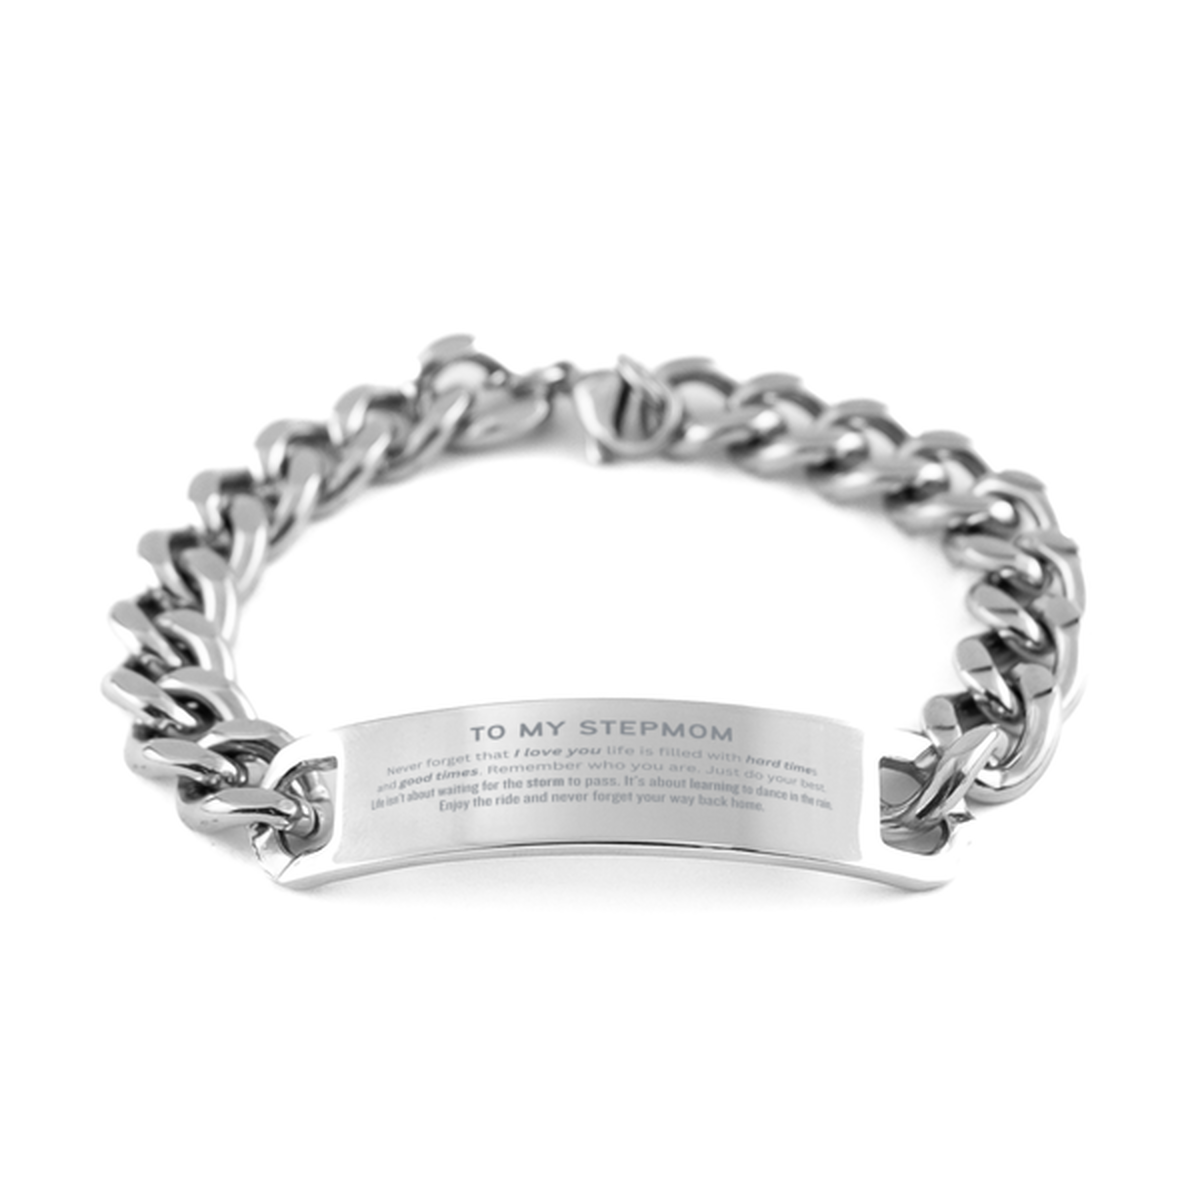 Christmas Stepmom Cuban Chain Stainless Steel Bracelet Gifts, To My Stepmom Birthday Thank You Gifts For Stepmom, Graduation Unique Gifts For Stepmom To My Stepmom Never forget that I love you life is filled with hard times and good times. Remember who yo